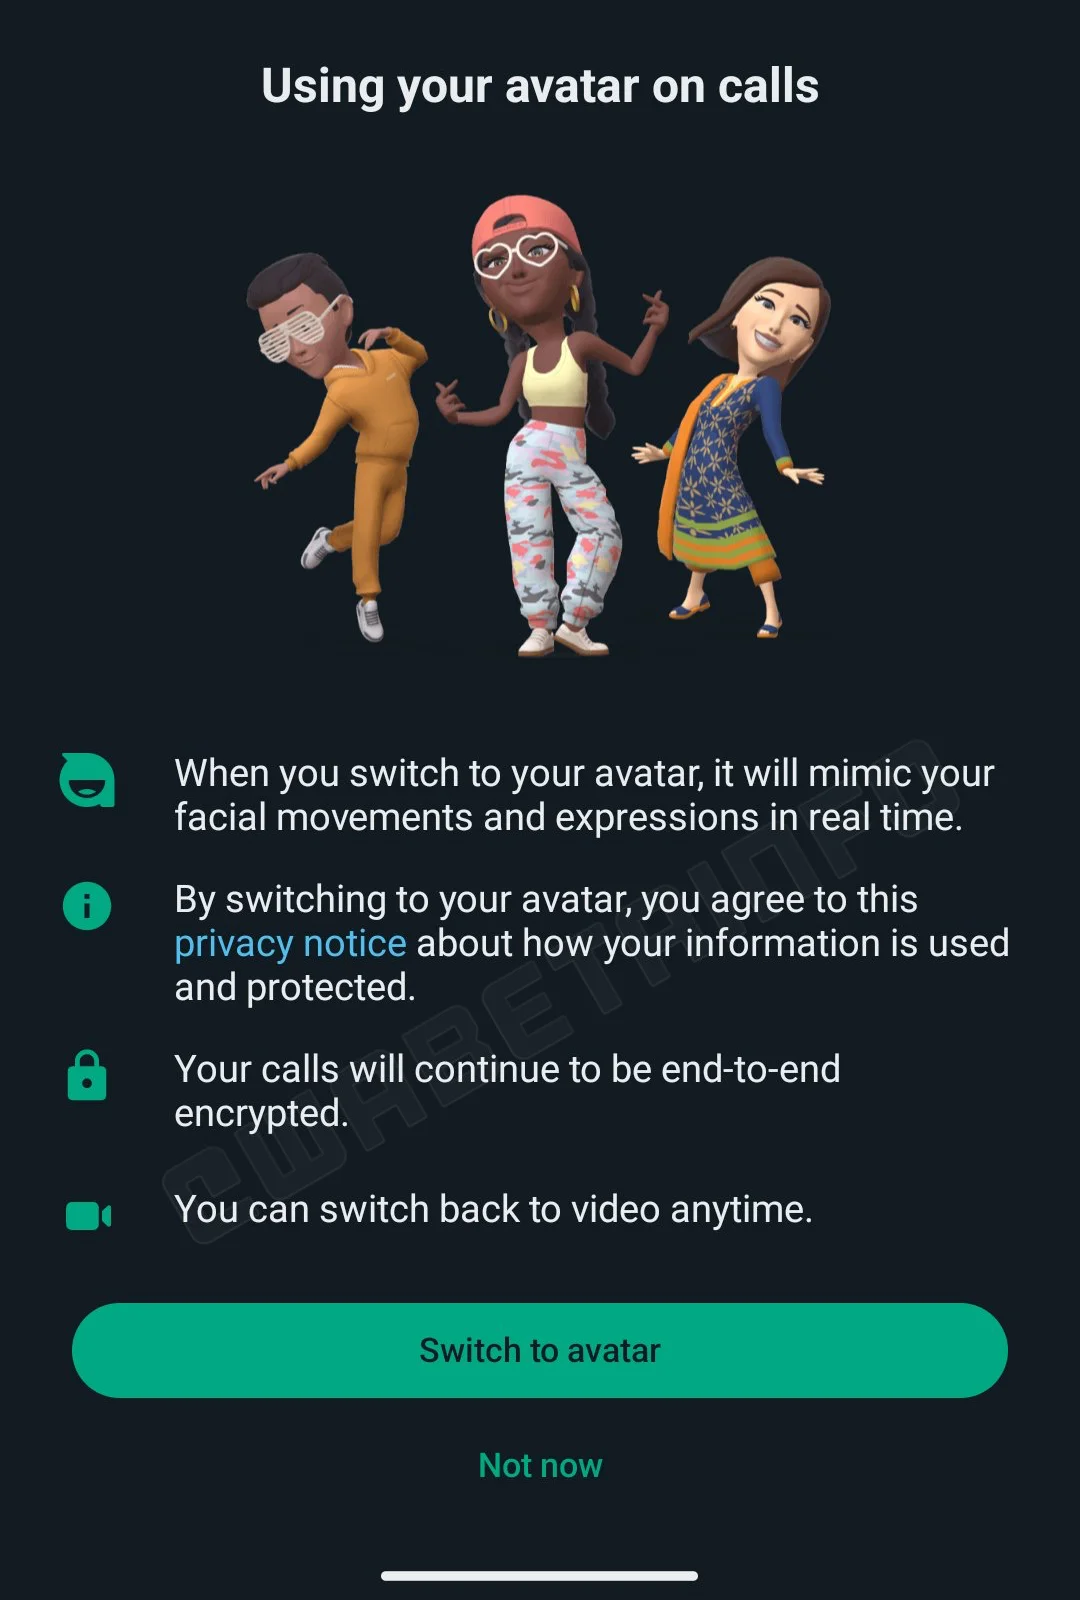 WA AVATAR CALLING FEATURE PRESENTATION ANDROID - Memoji could soon be used in WhatsApp Video Calls